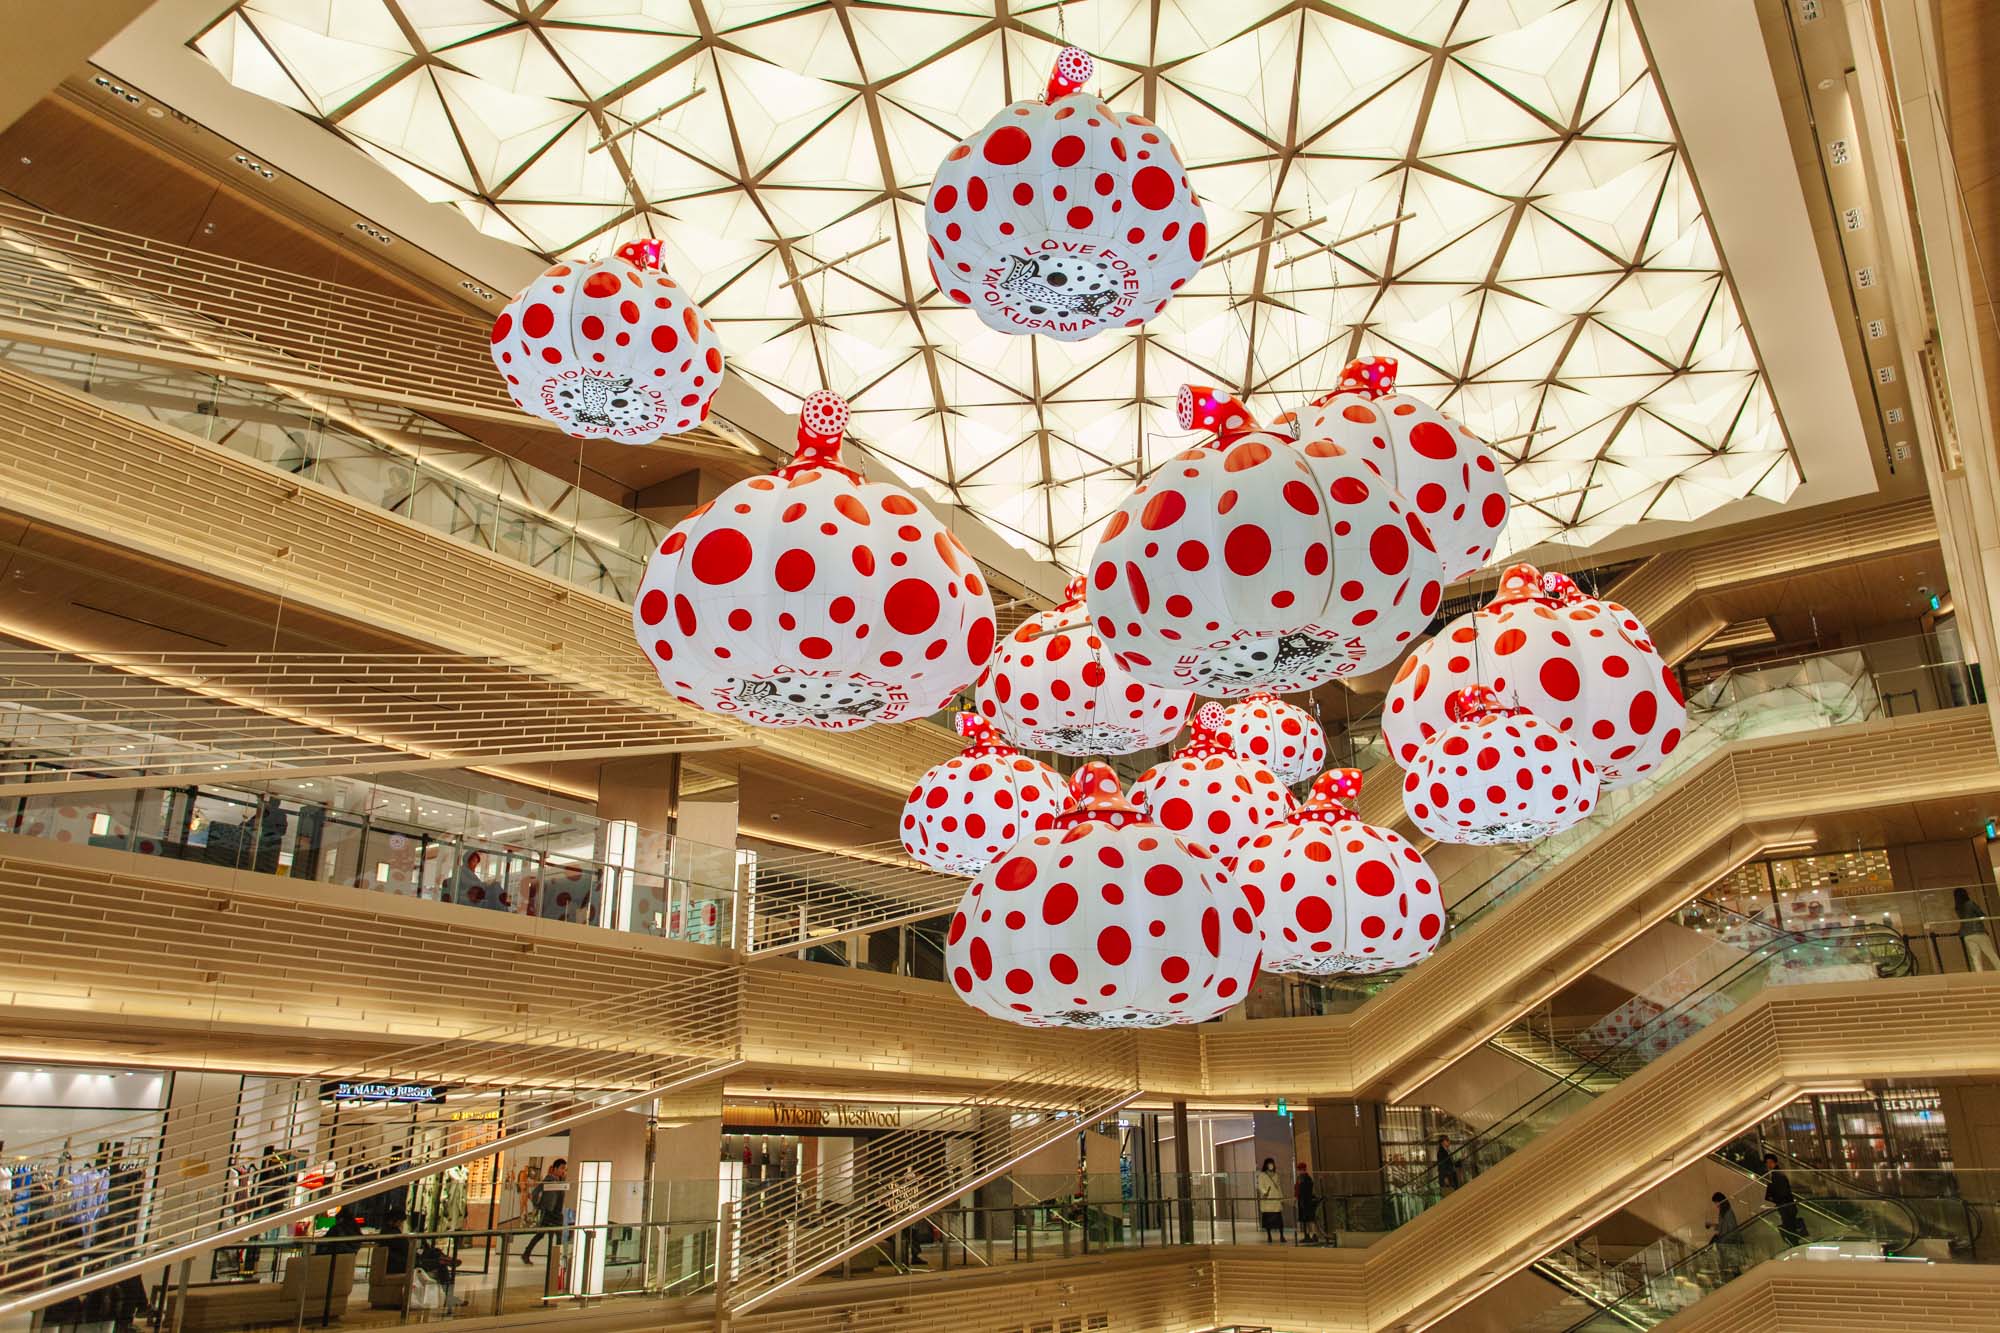 Tokyo's Best Shopping Malls for Design Lovers - WHEN IN TOKYO